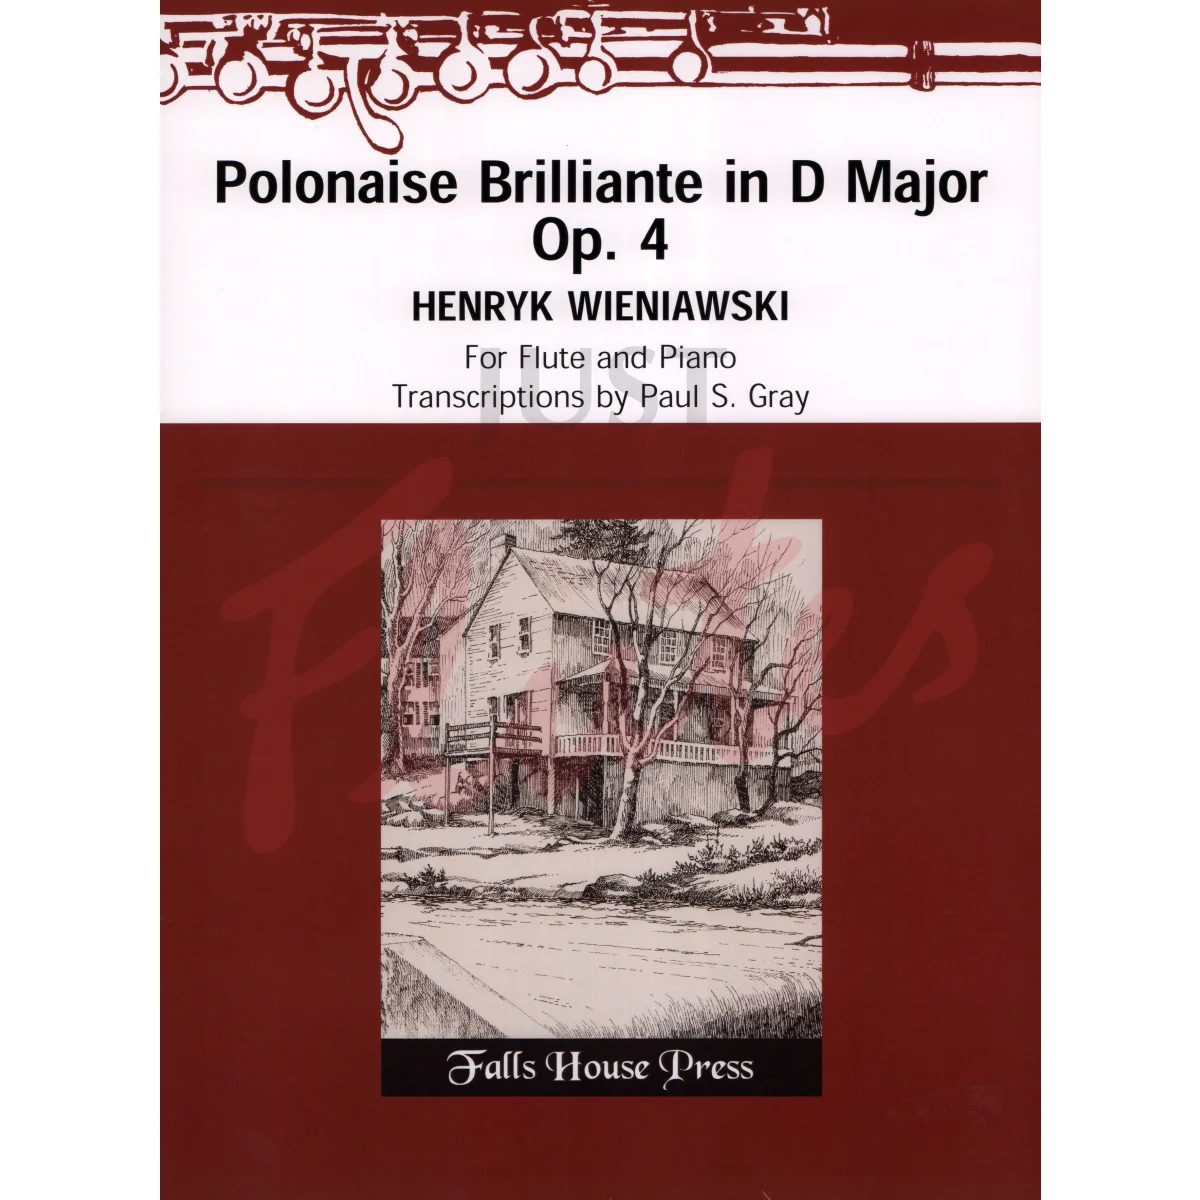 Polonaise Brilliante in D major arranged for Flute and Piano